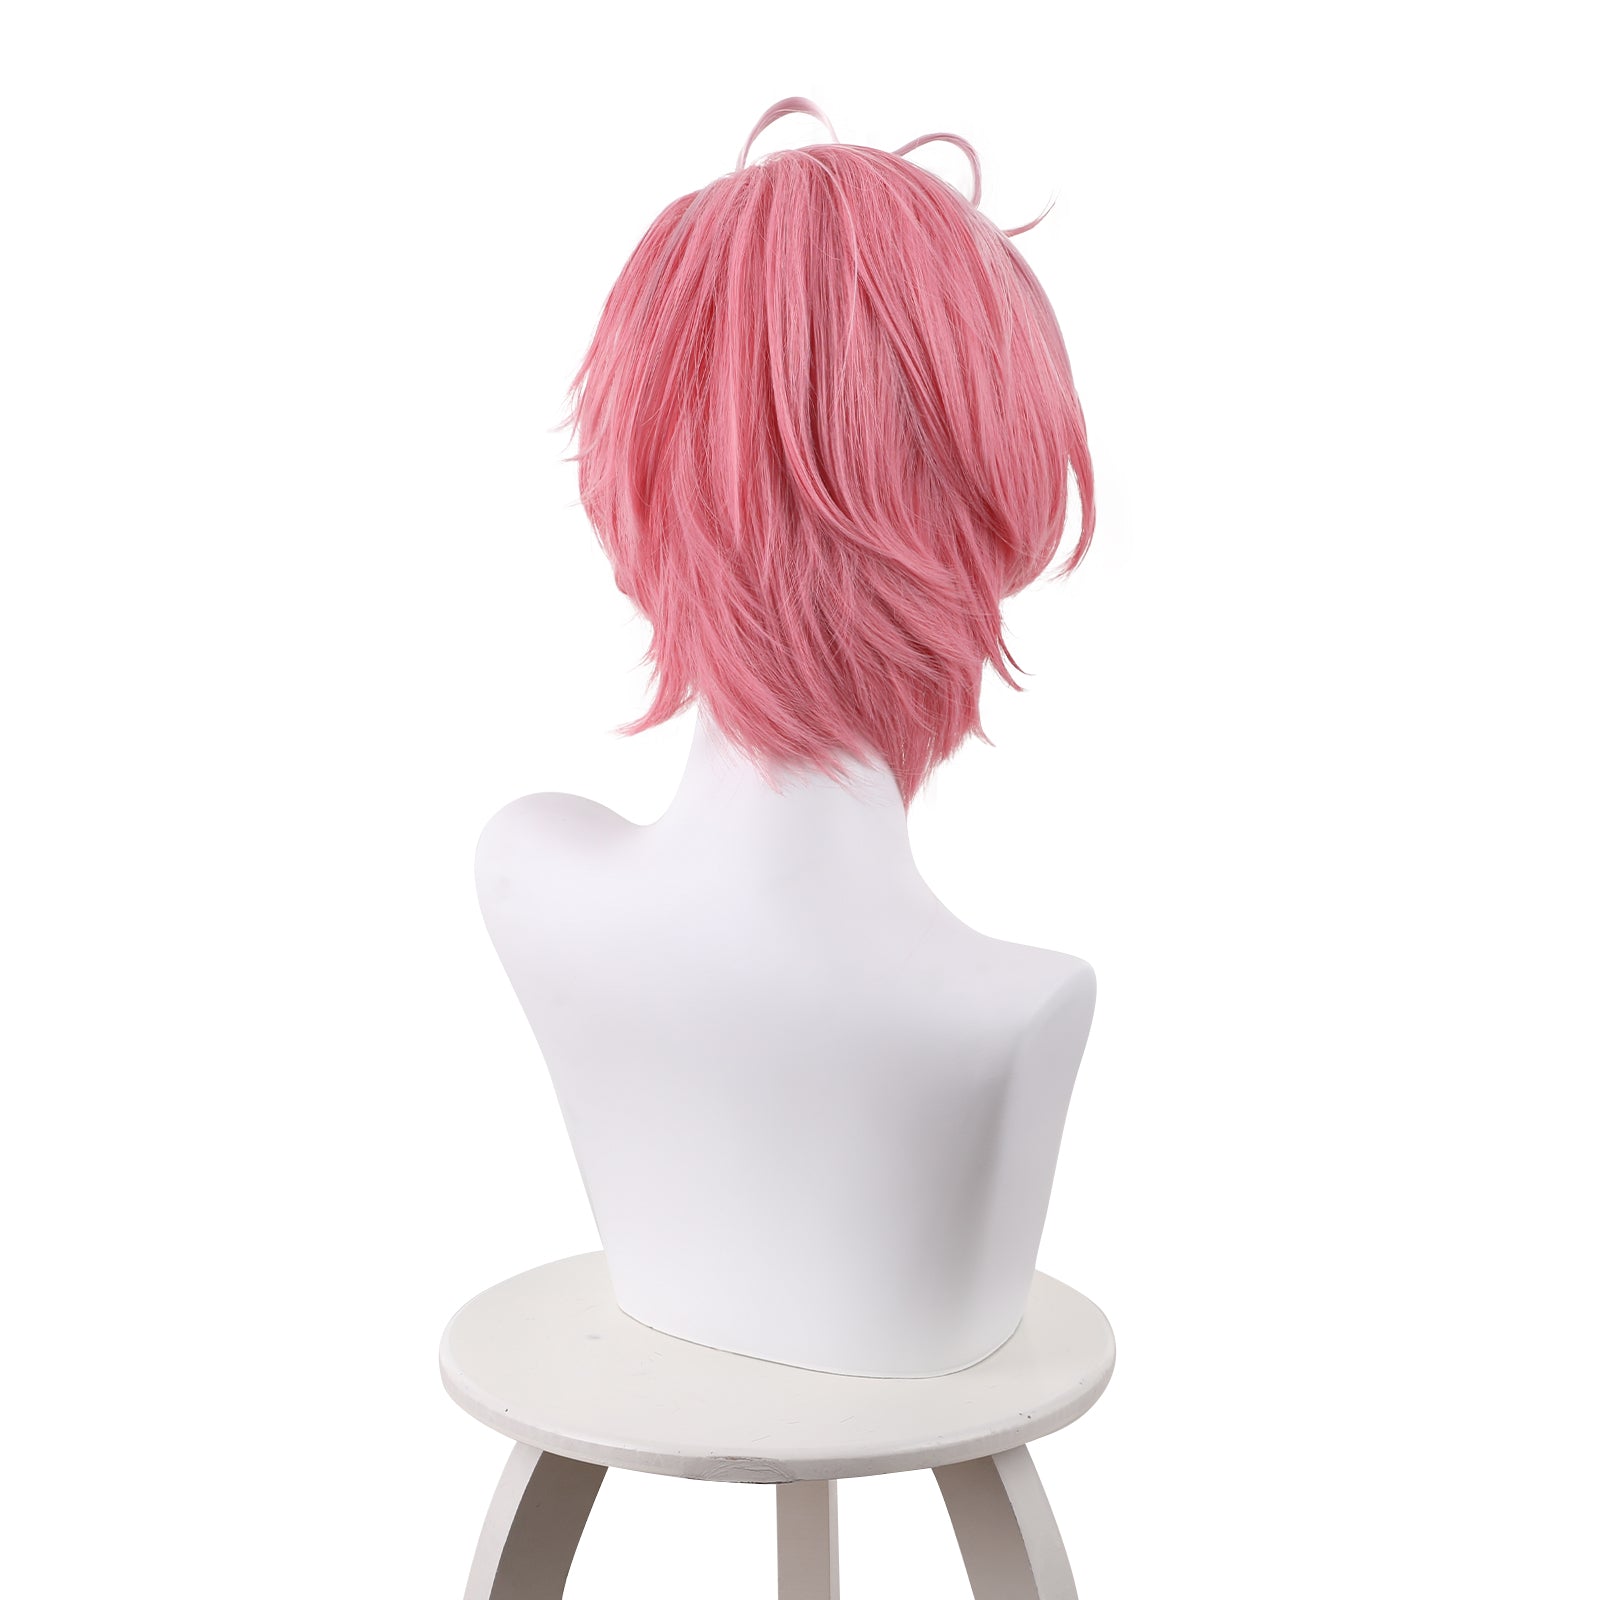 Rulercosplay Anime Fragaria Memories Melode Pink with White Short Cosplay Wig